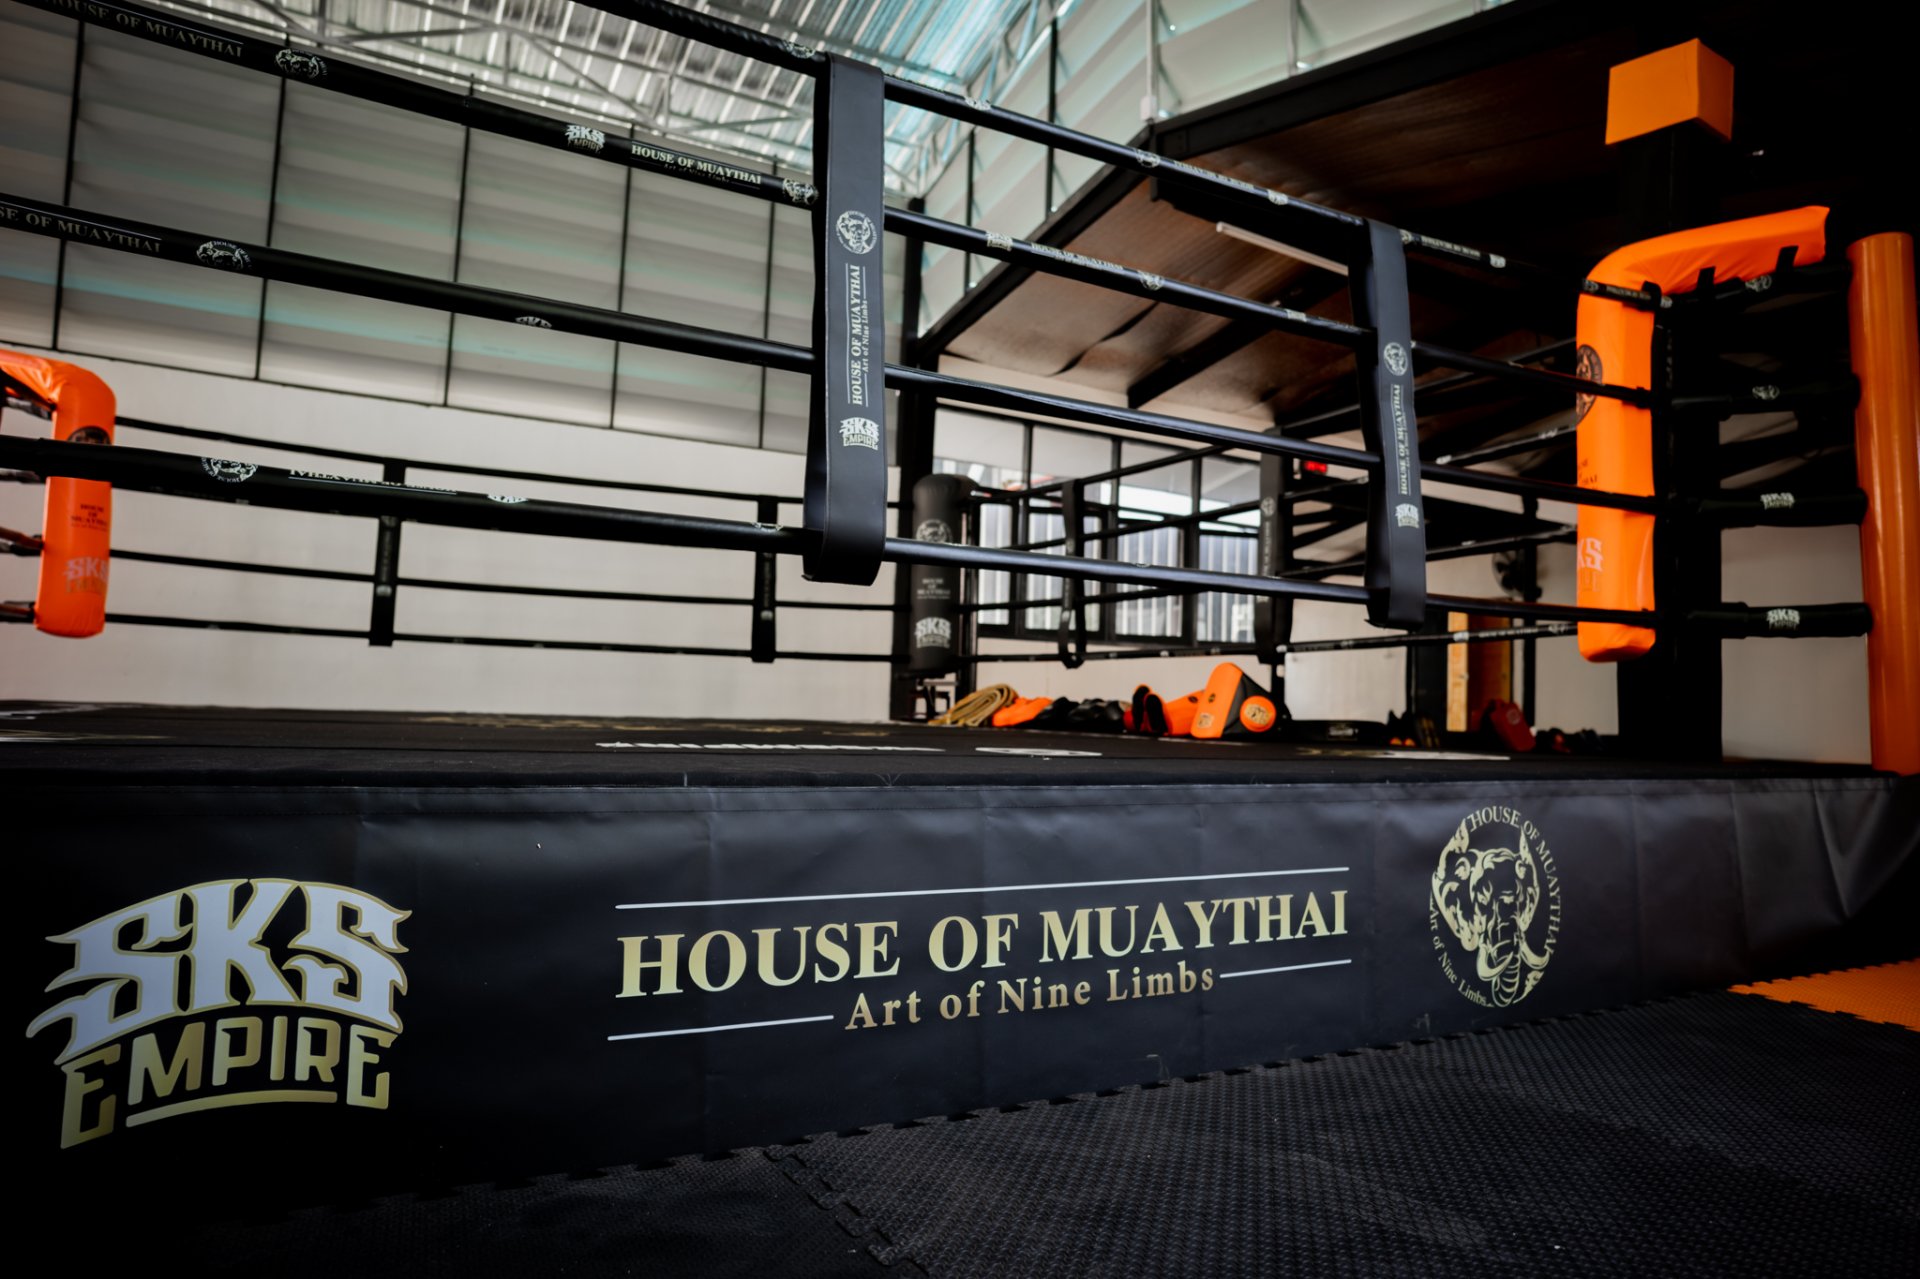 The House of Muay Thai